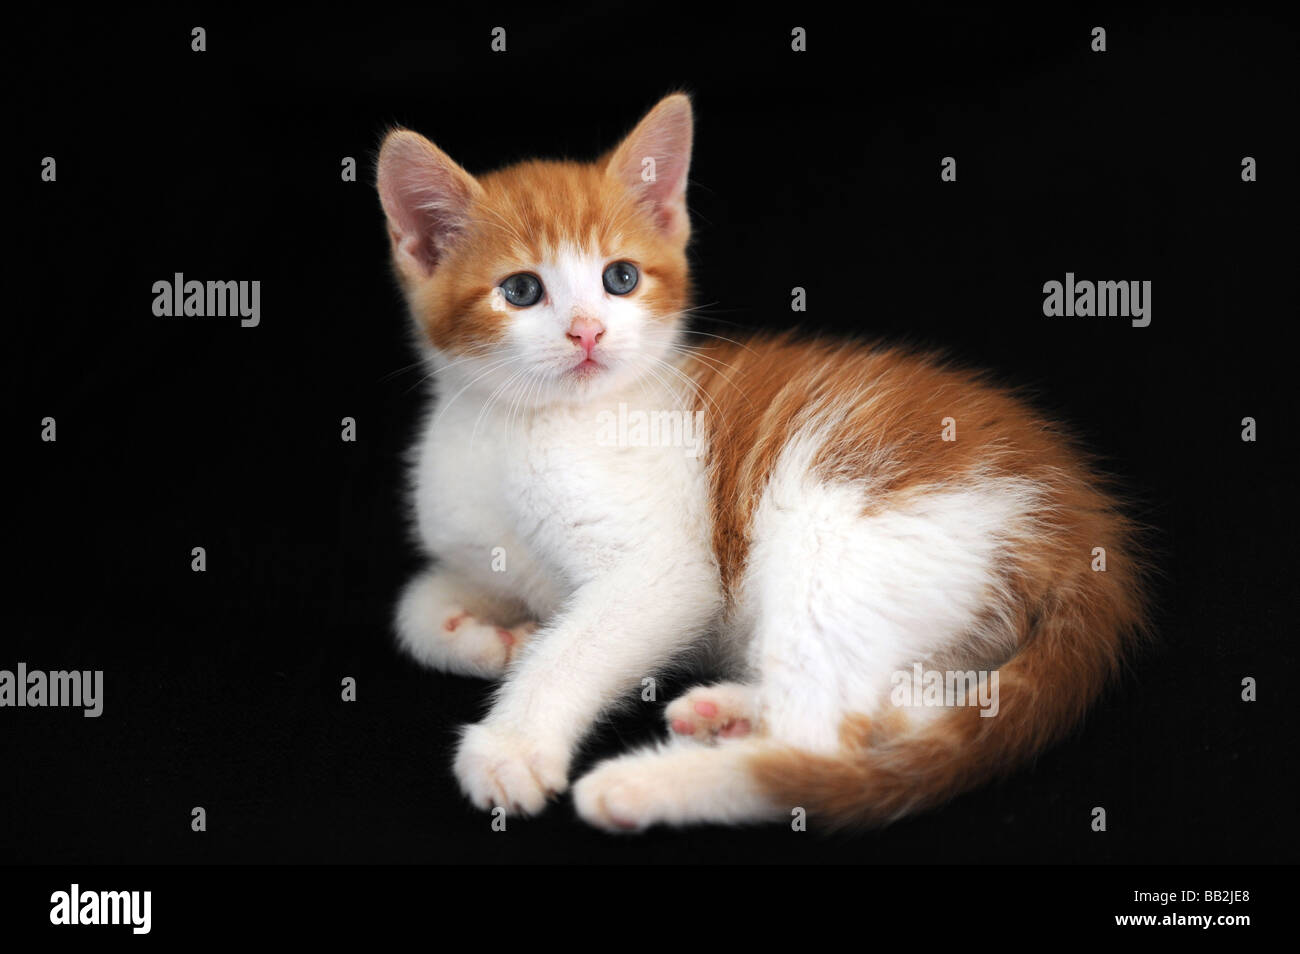 a small ginger and white kitten looking up against a black background Stock Photo